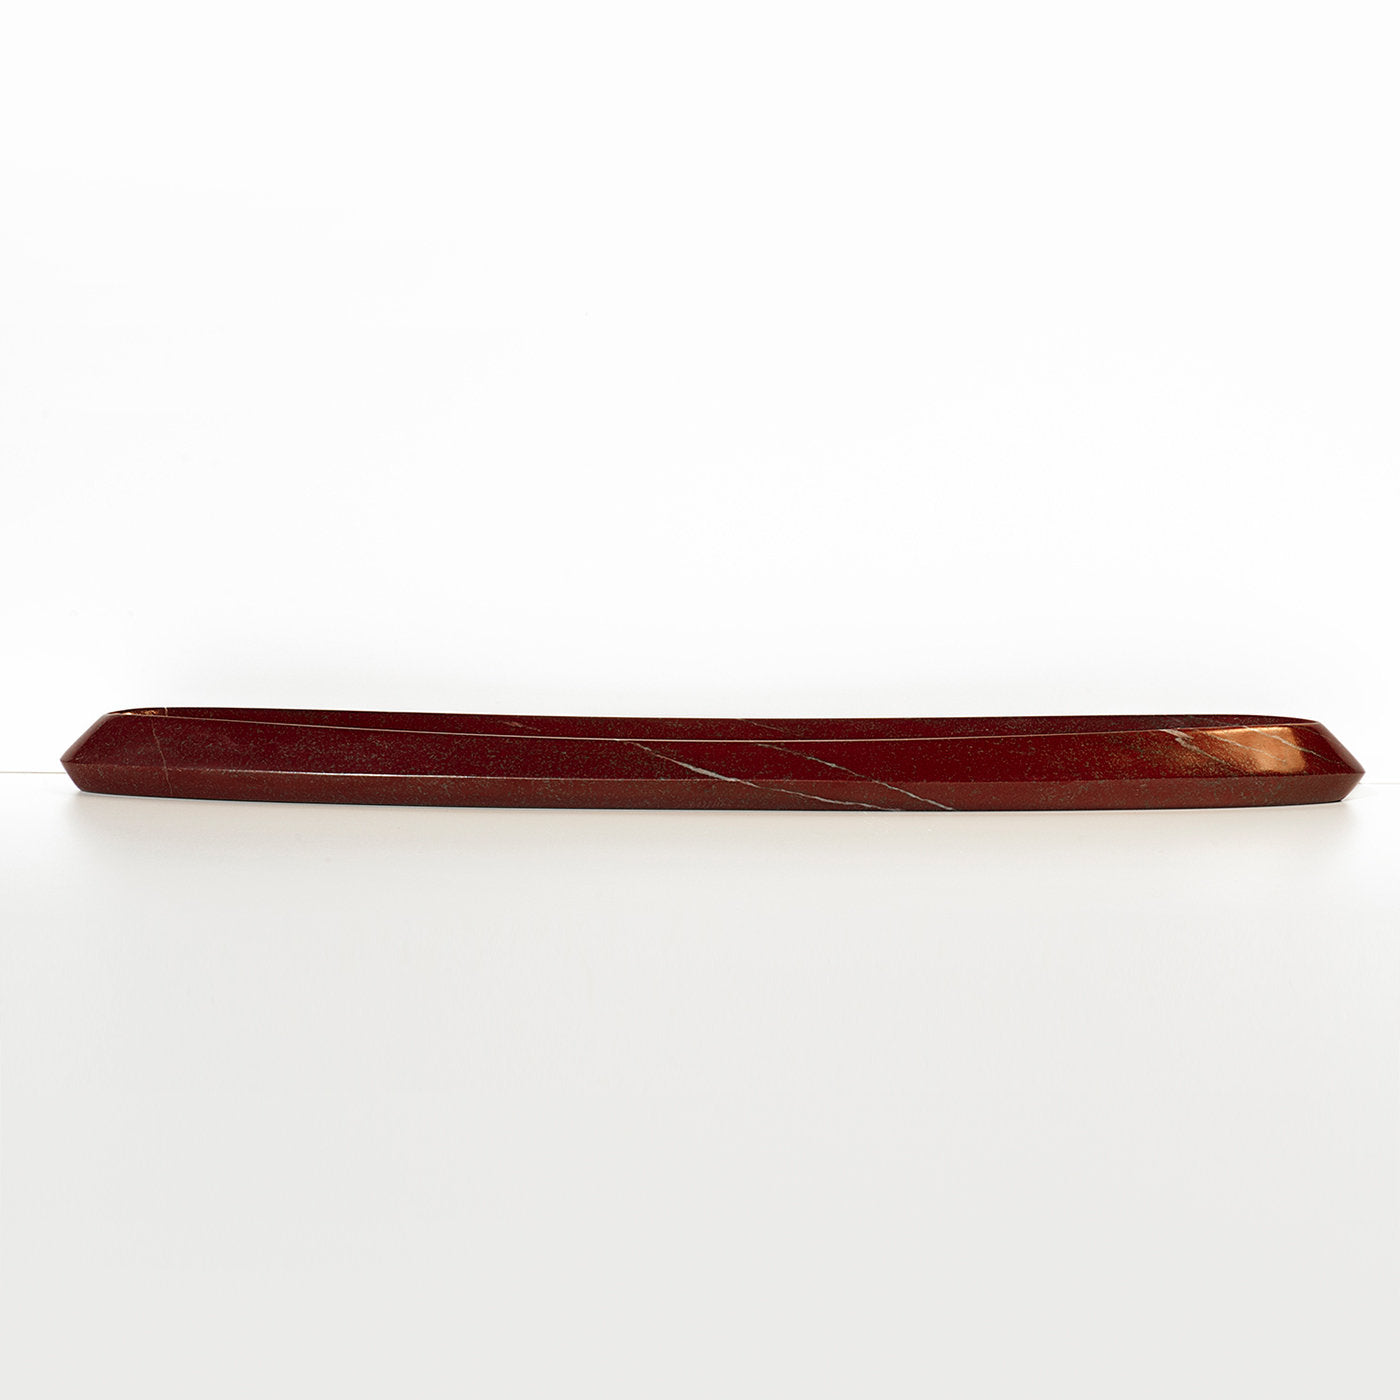 Ipazia Ruby Red Fruit Bowl  - Alternative view 3